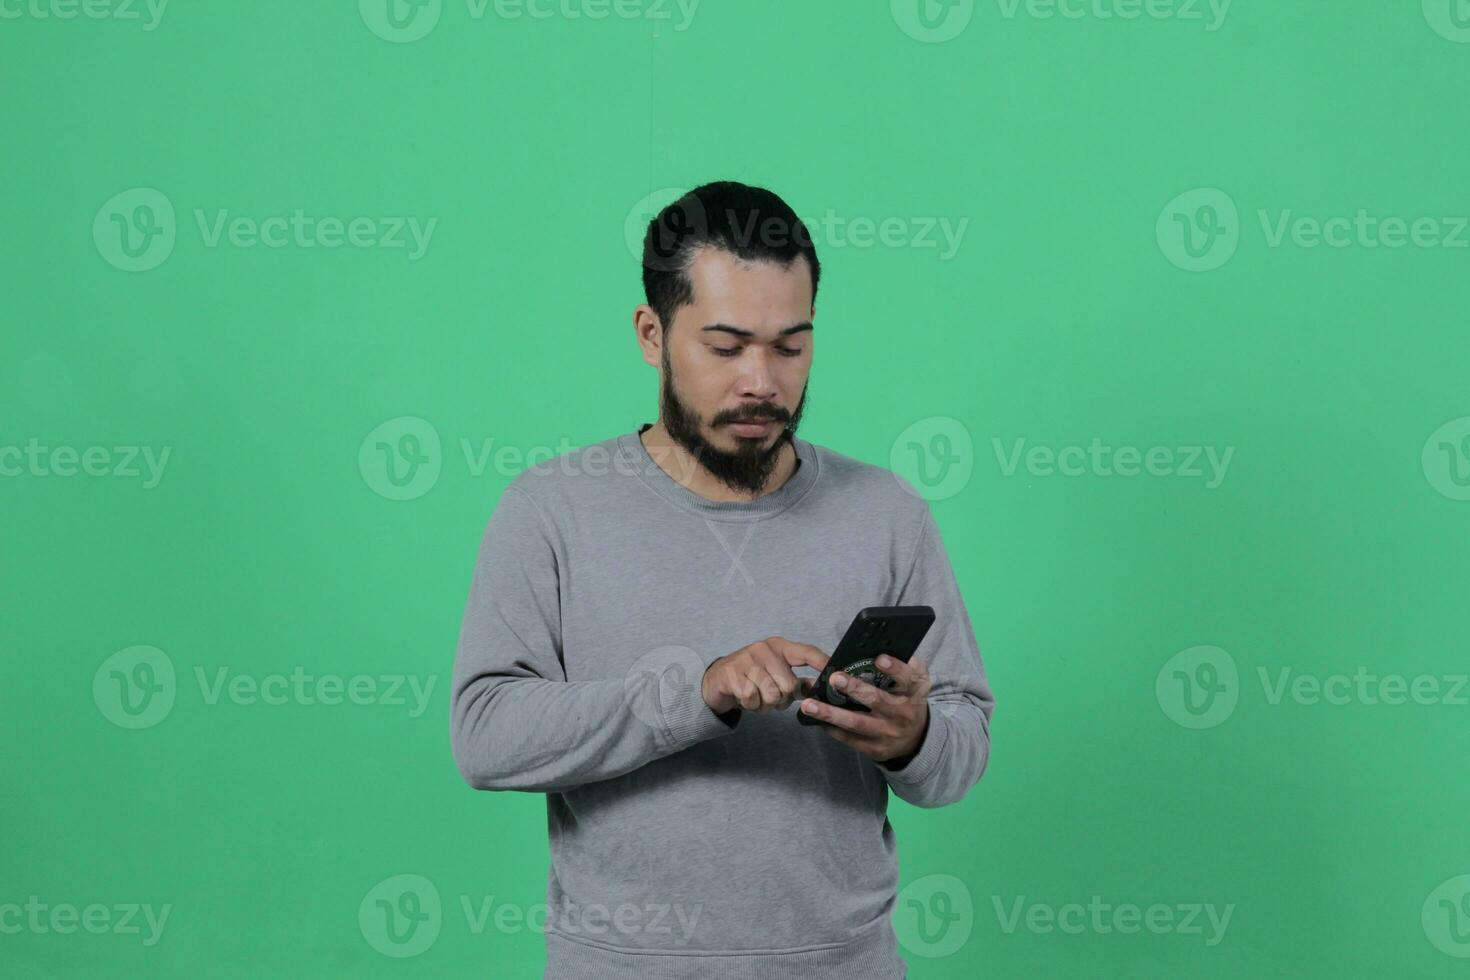 asian man expression while using smartphone photo